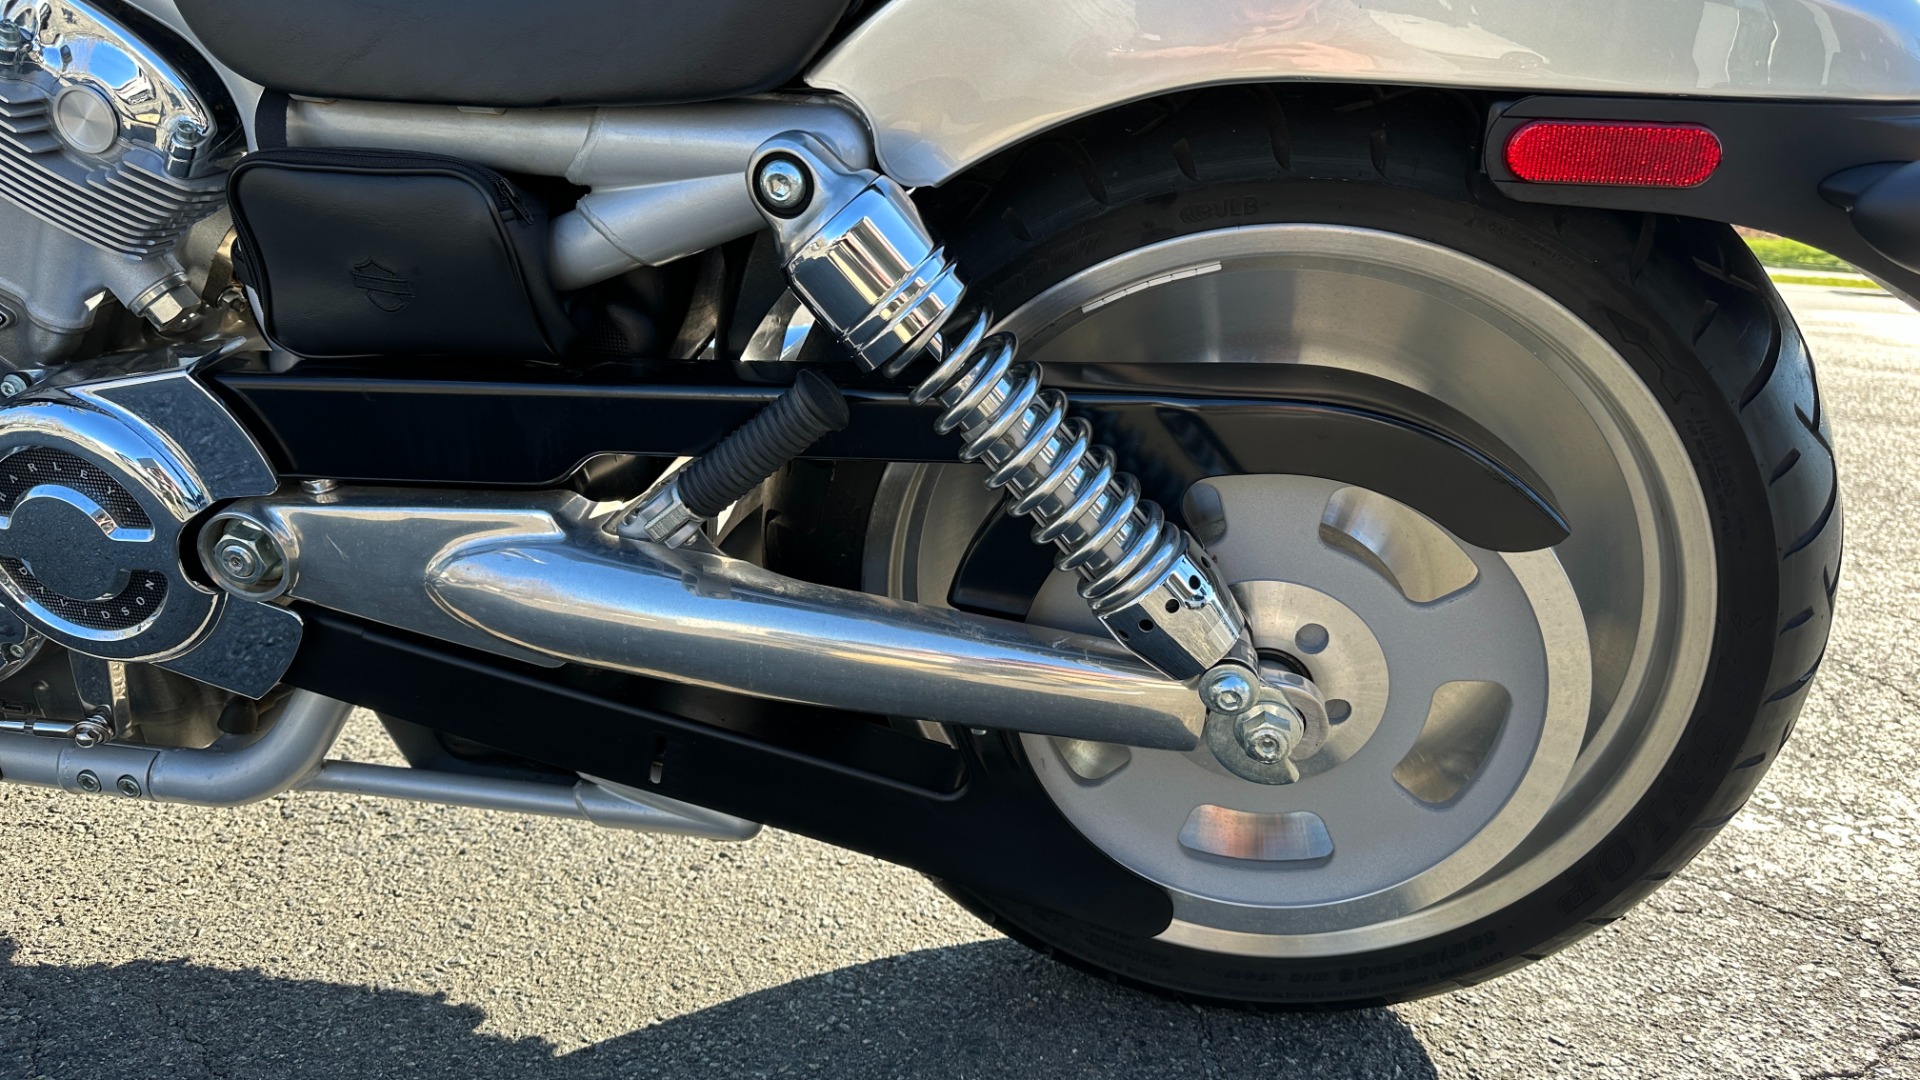 Used 2003 Harley Davidson V Rod ANNIVERSARY EDITION / 1130CC ENGINE / BREMBO BRAKES / VORTEX AIR SCOOPS for sale $9,995 at Formula Imports in Charlotte NC 28227 6